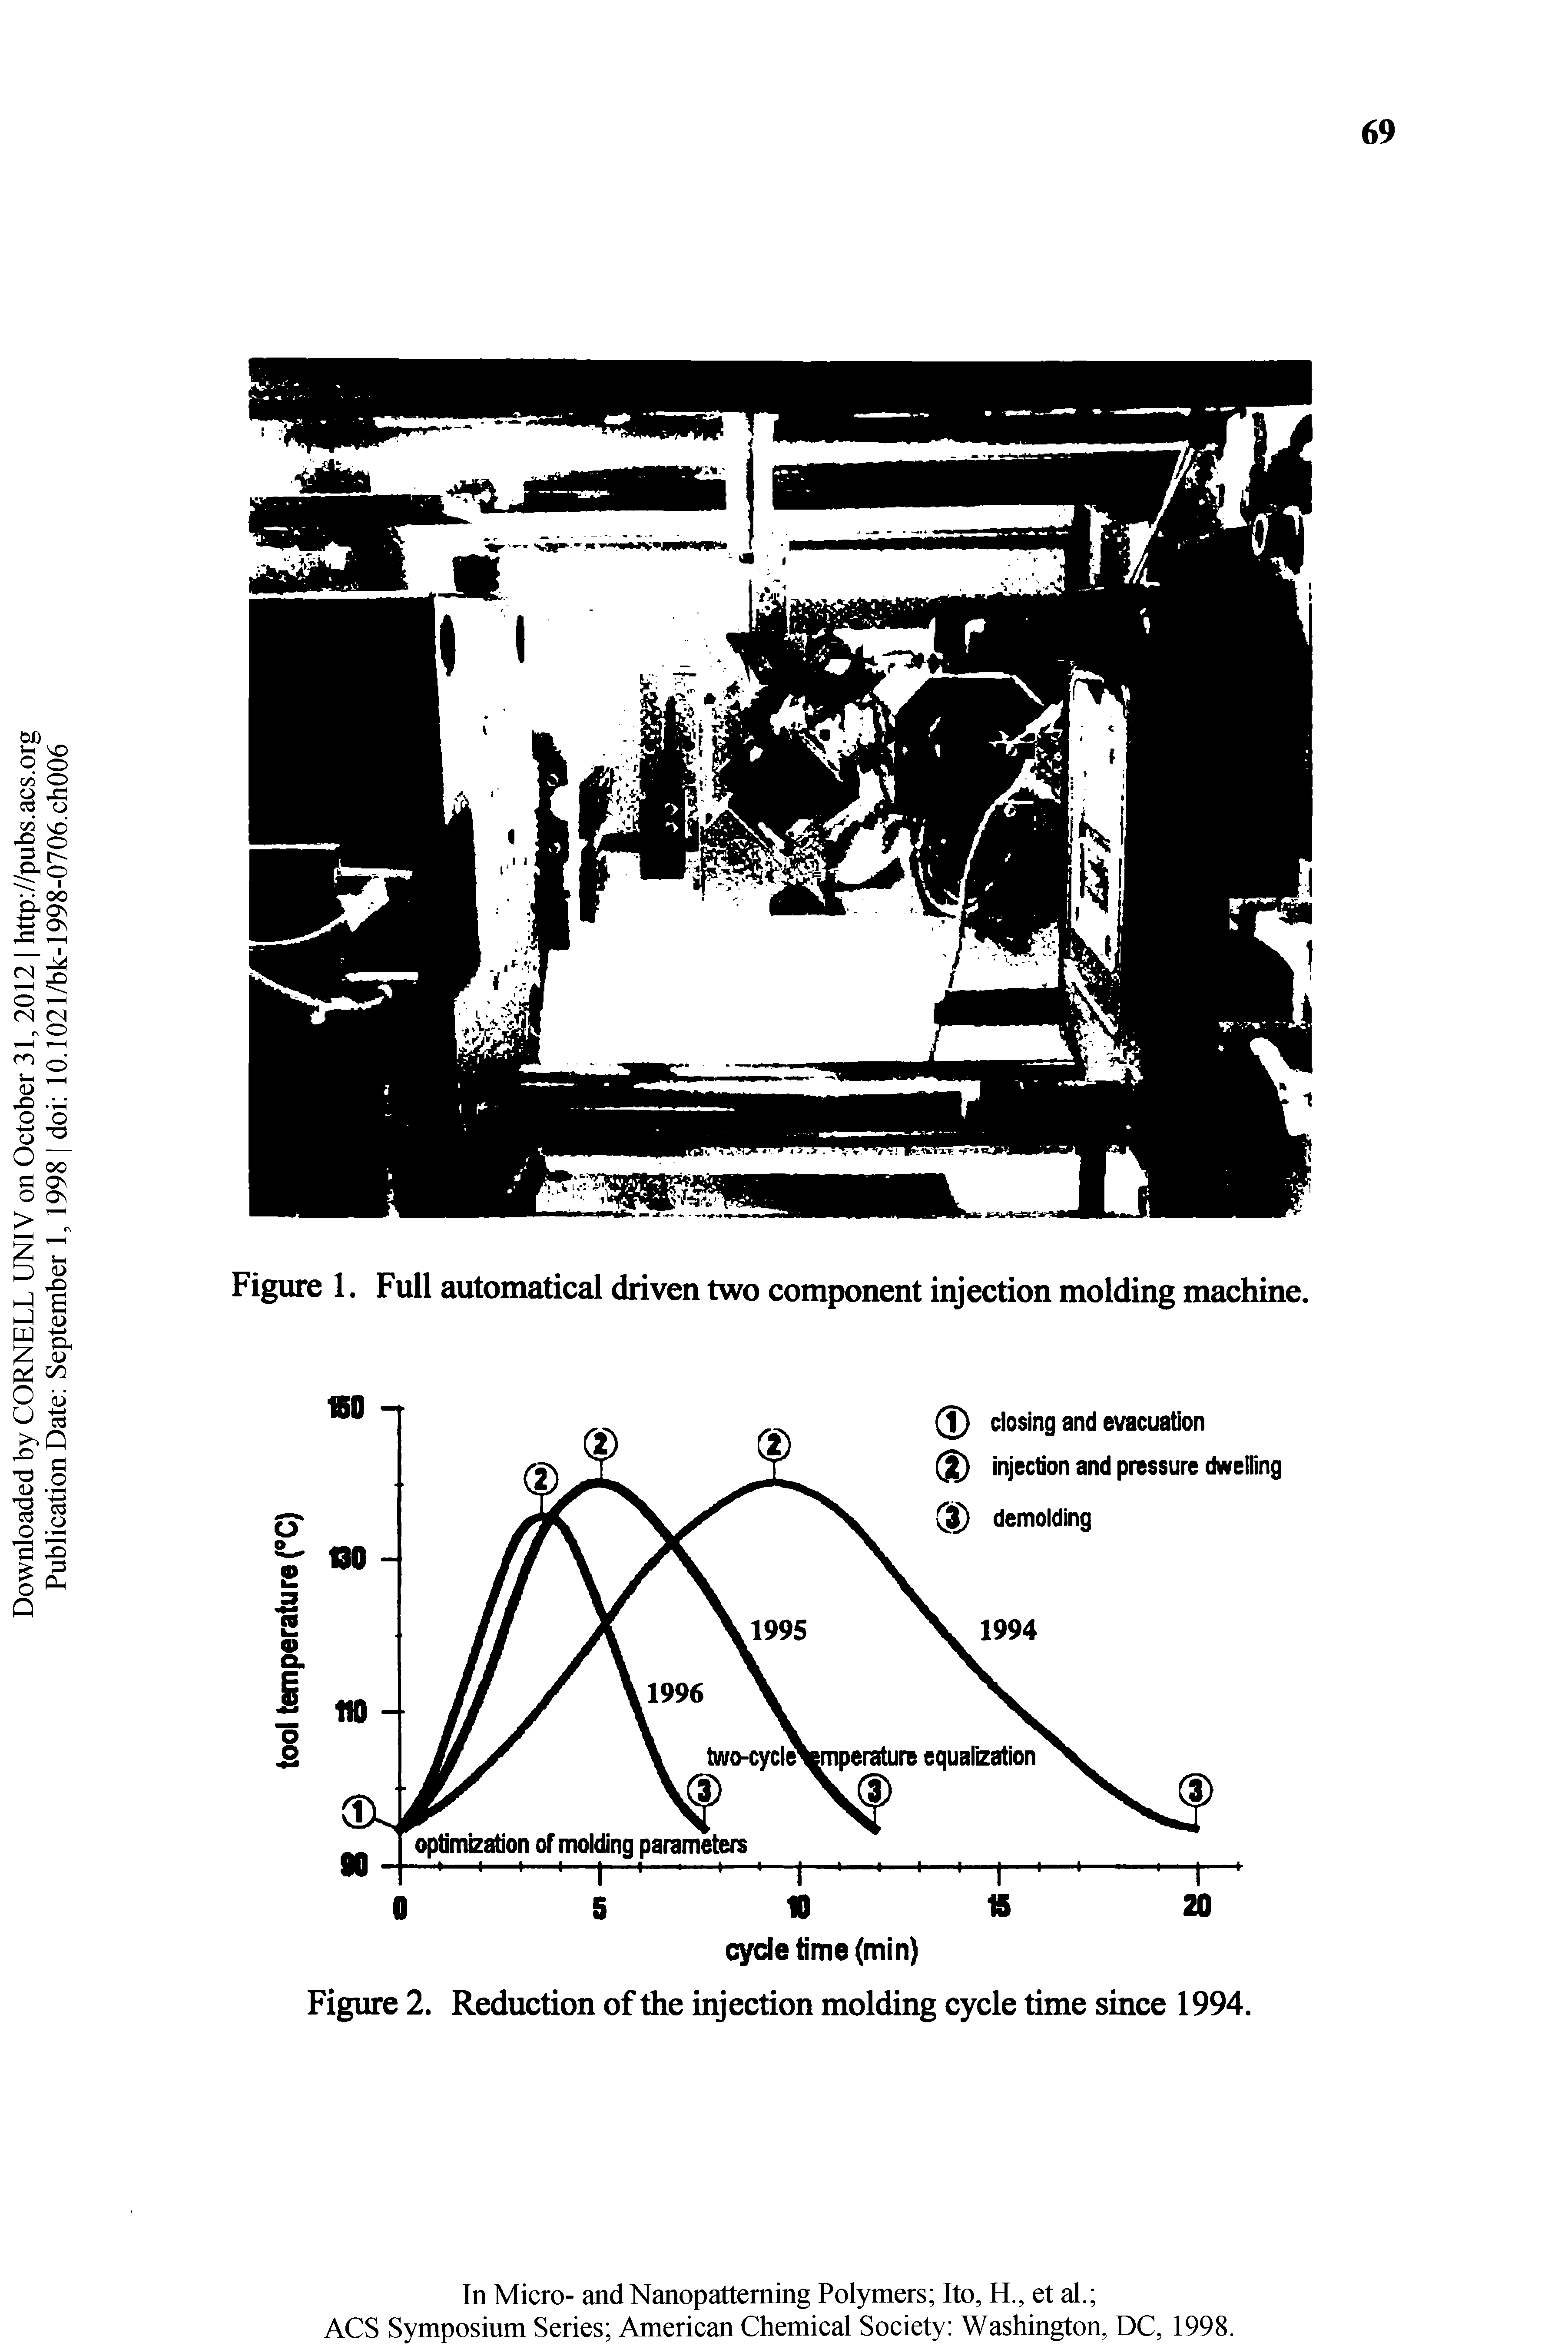 Figure 2. Reduction of the injection molding cycle time since 1994.